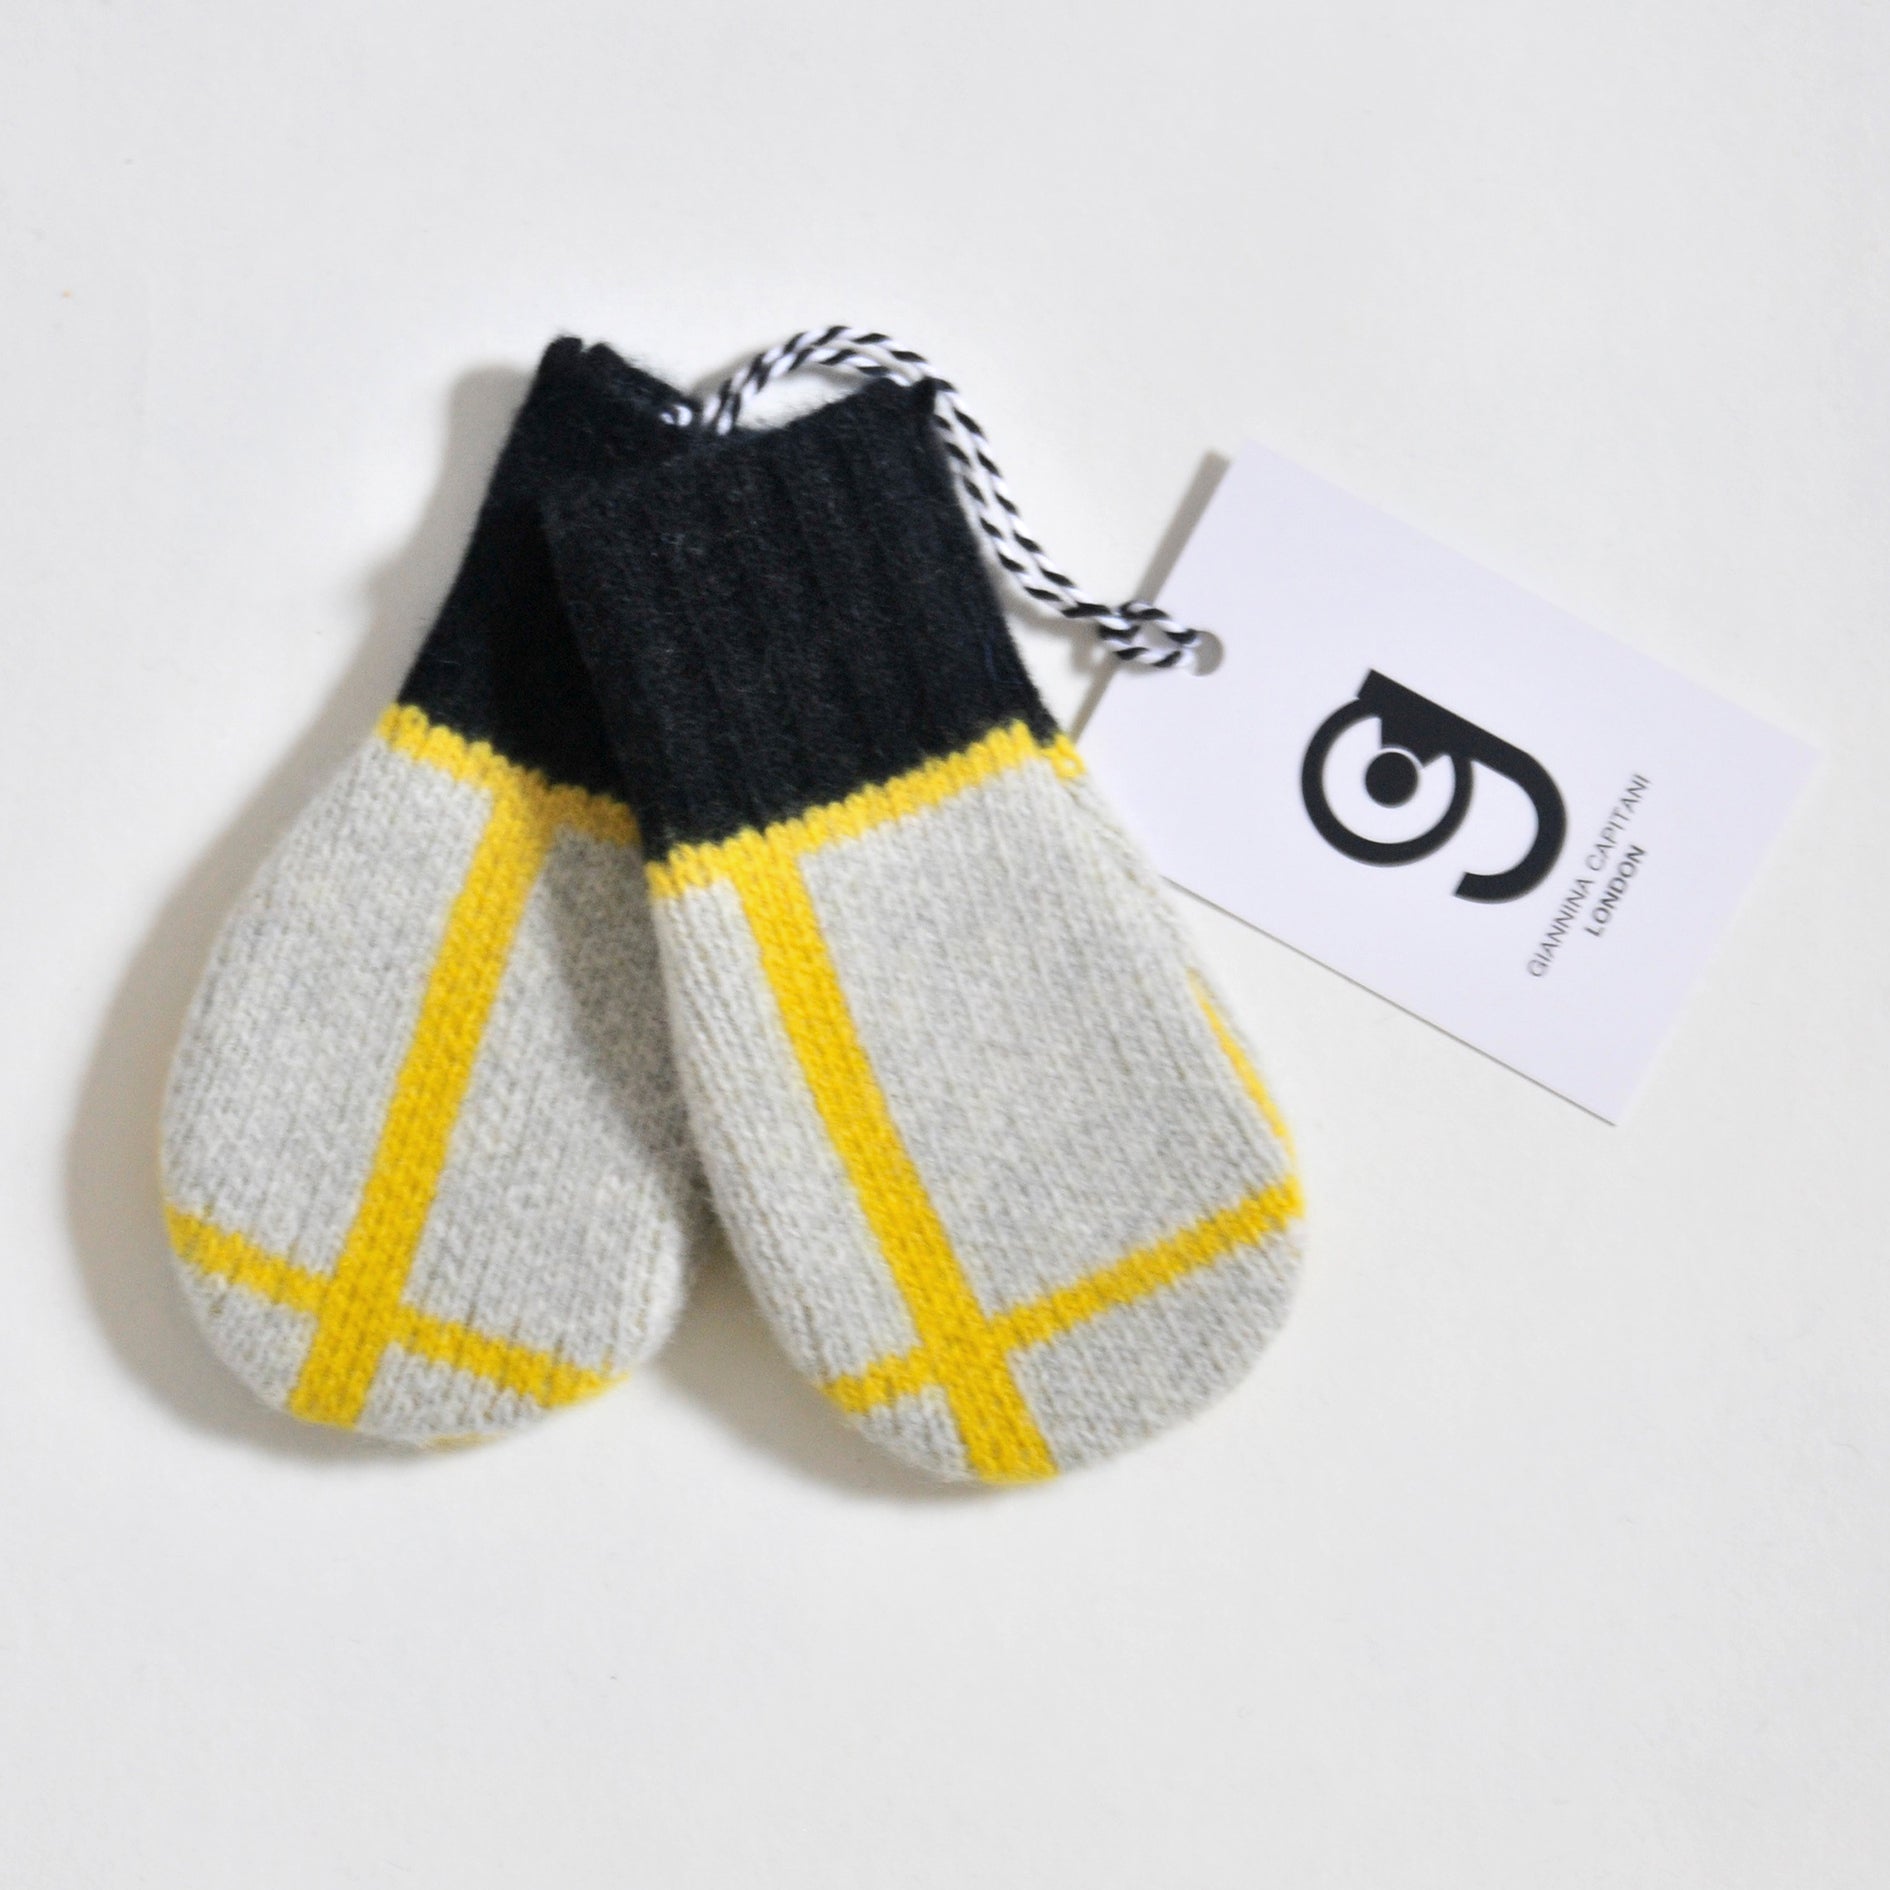 GRID BABY MITTEN IN GREY AND YELLOW